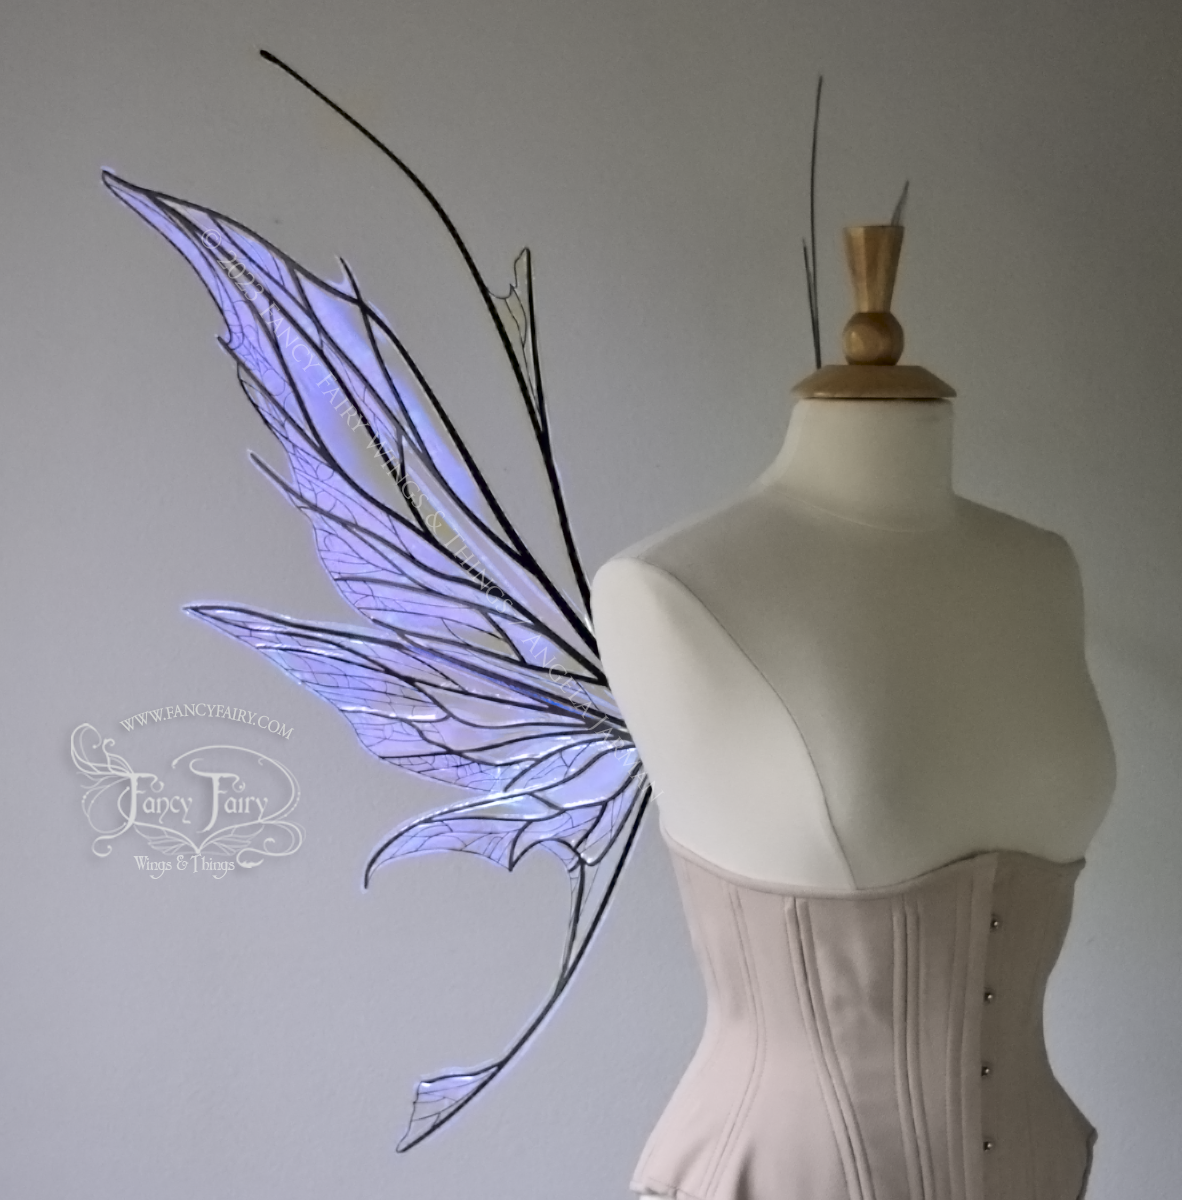 Left side view of a dress form wearing an underbust corset & large violet iridescent fairy wings with antennae, black veins, spikey shapes